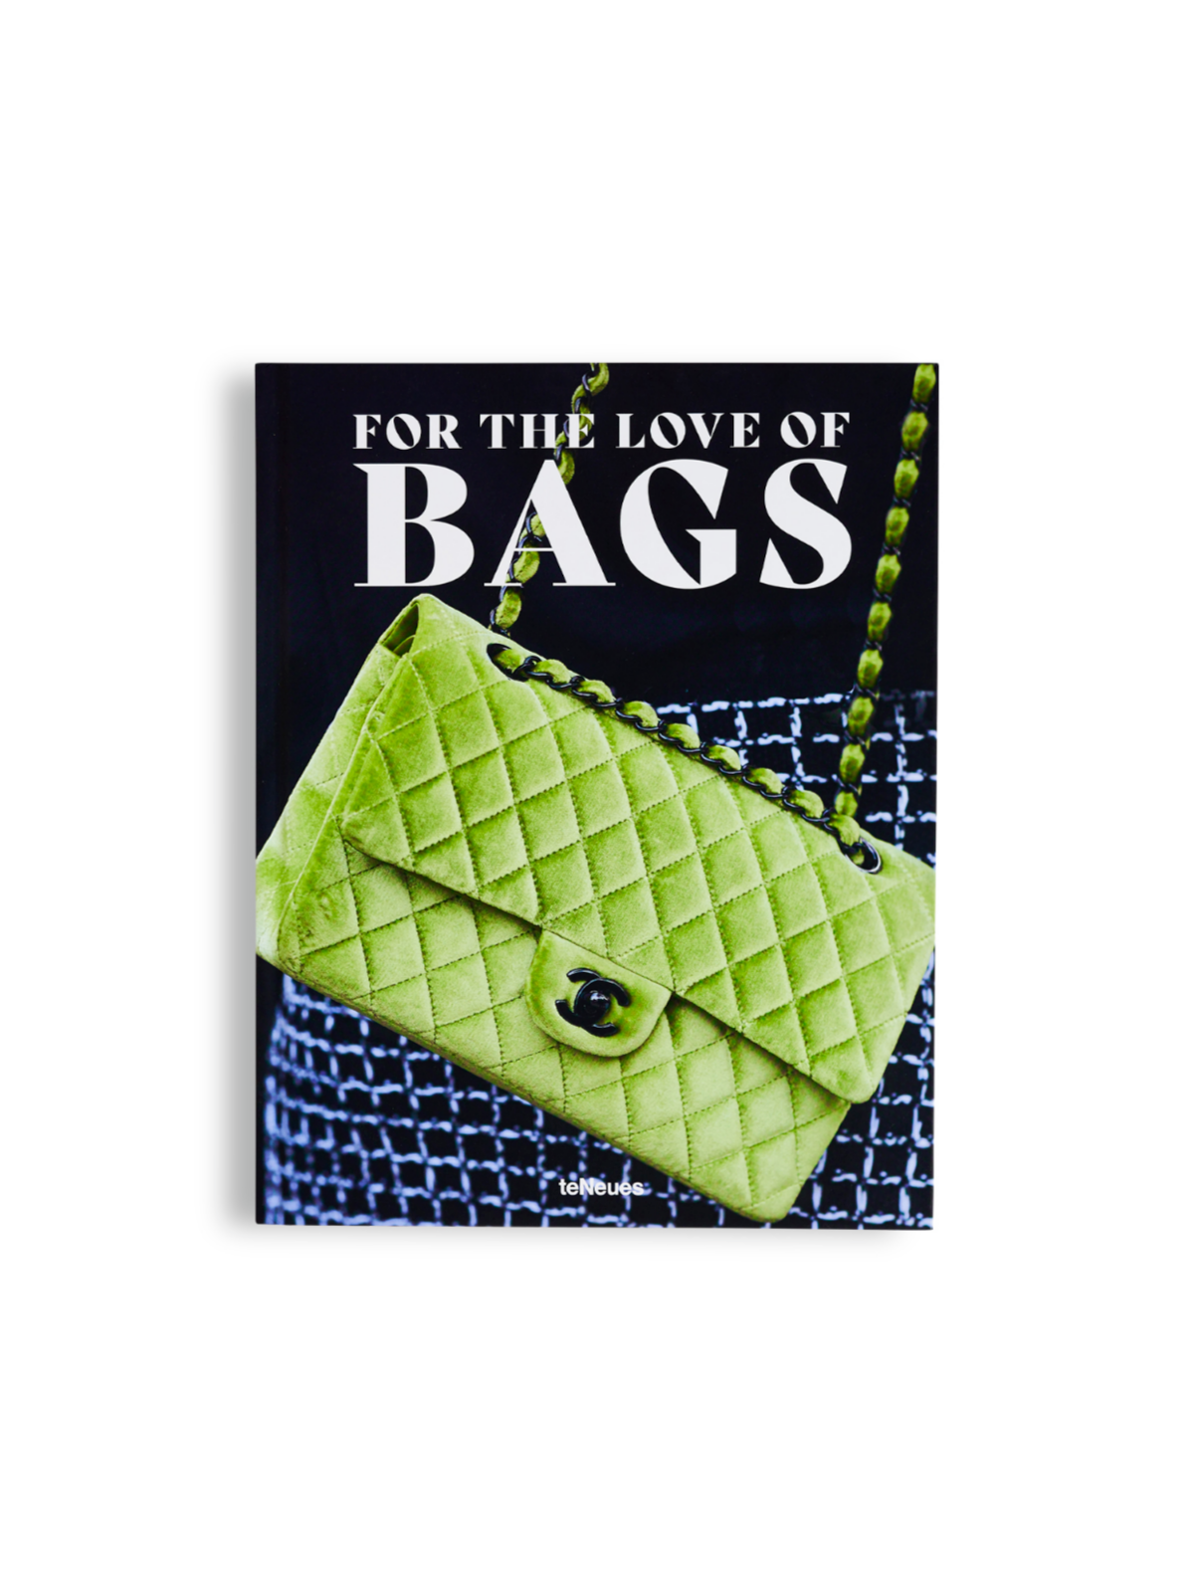 [Te Neues] FOR THE LOVE OF BAGS